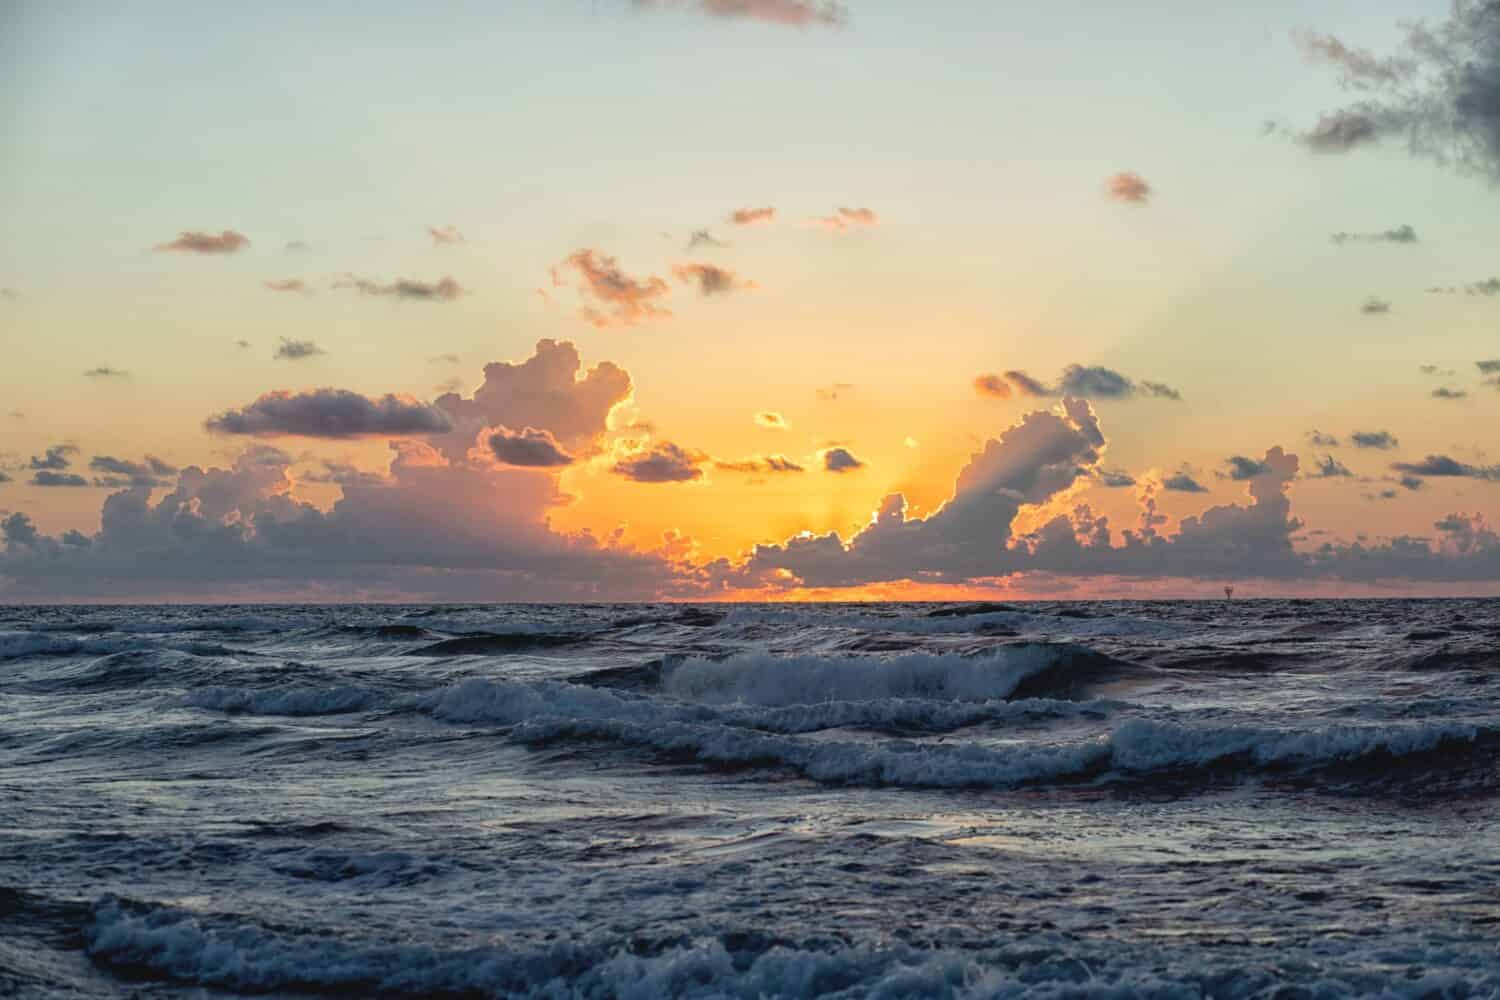 Sunrise on the Coast of Texas - photographed at Mustang Island State Park